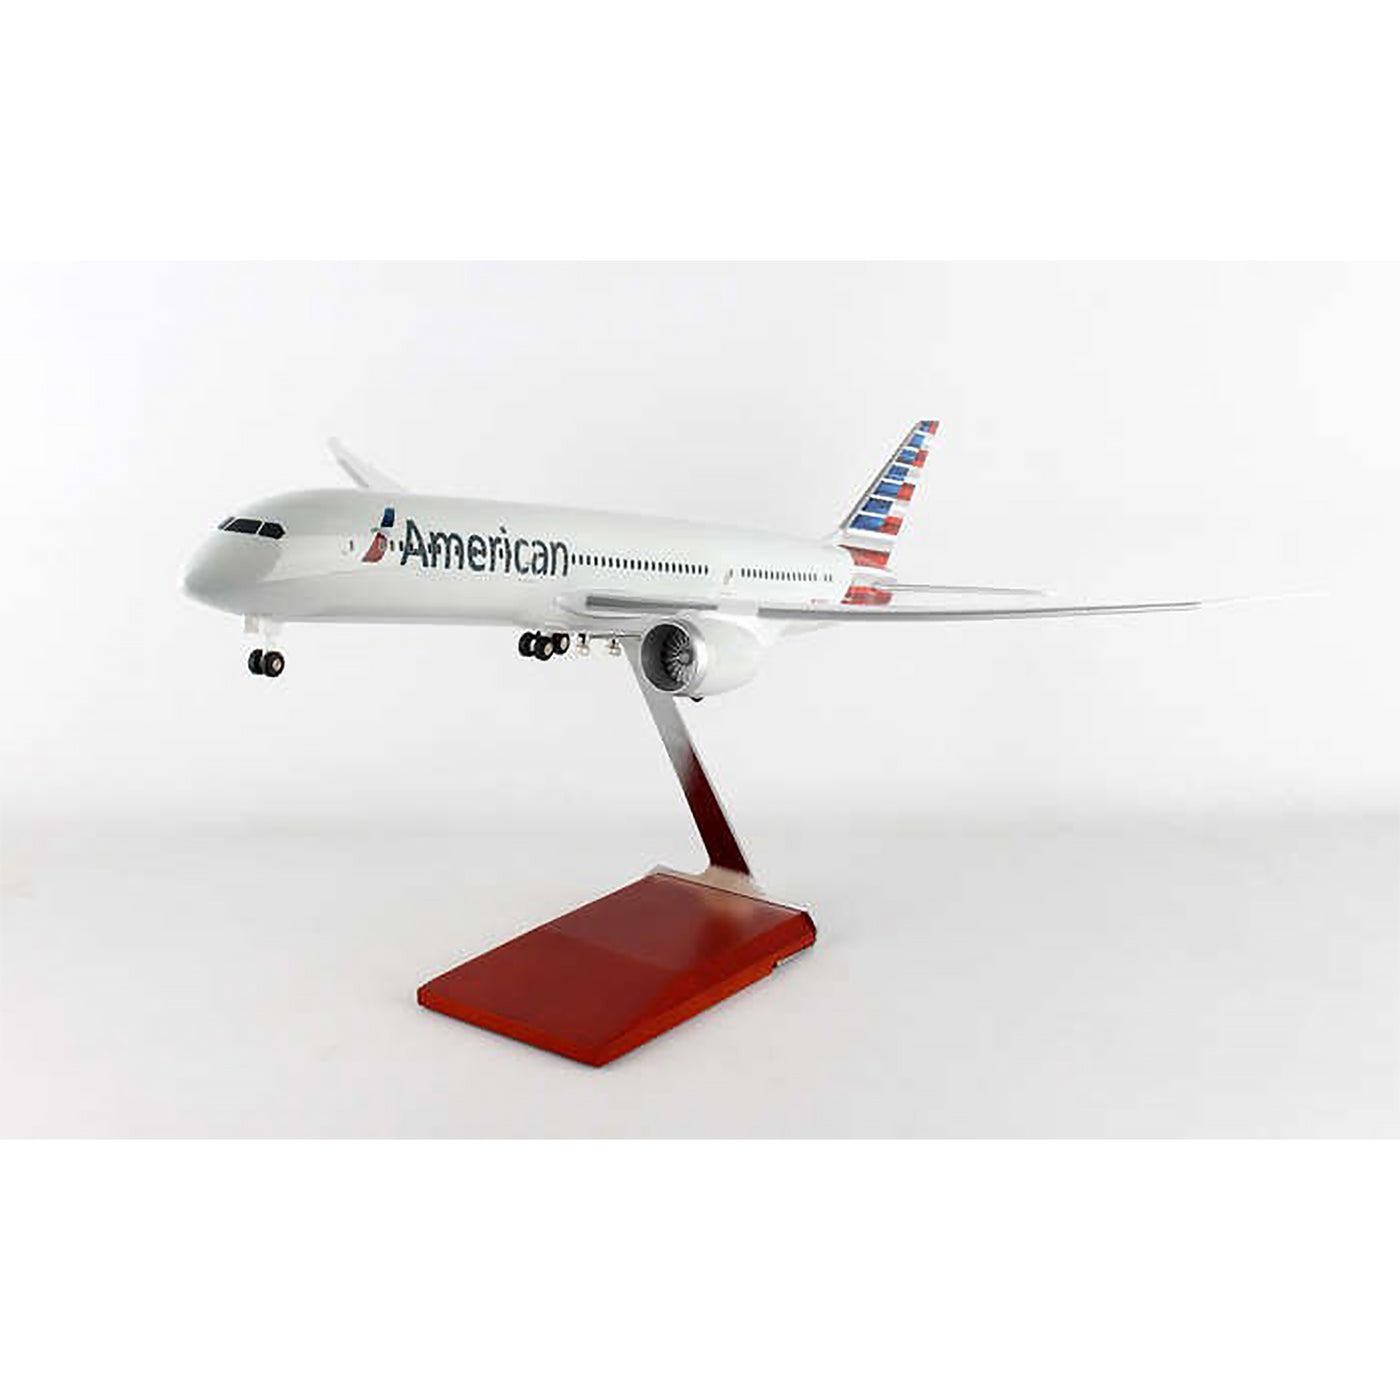 1/100 American Airlines w/gear and stnd